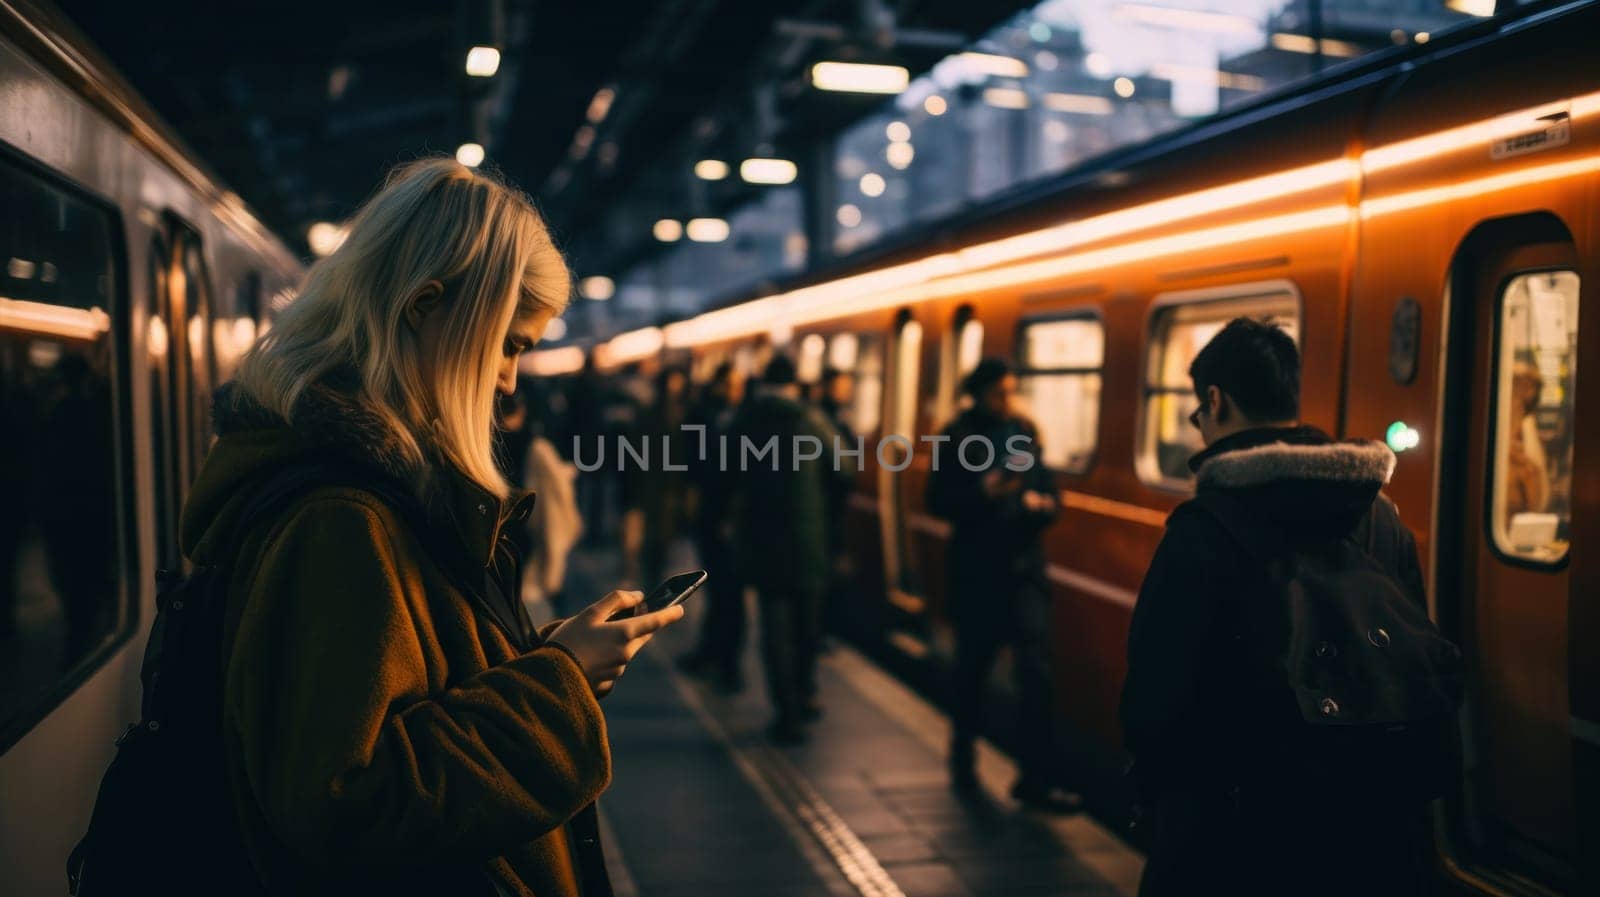 A woman standing next to a train while using her cell phone